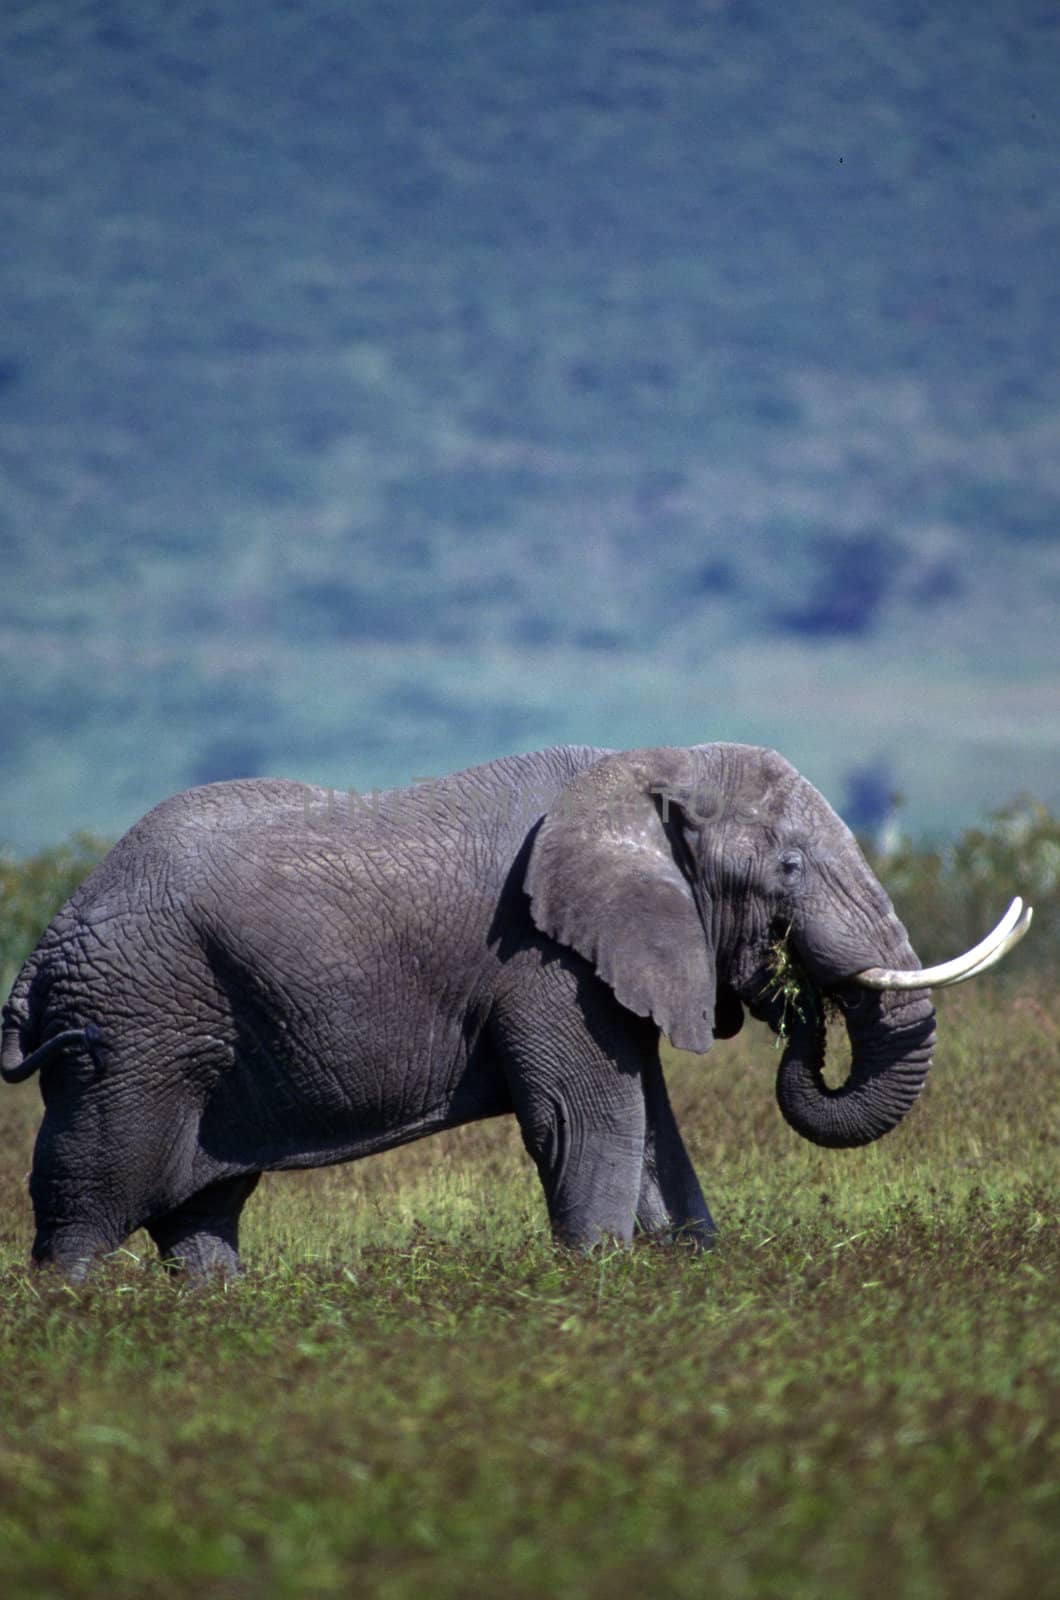 Adult elephant on the plain and herd.